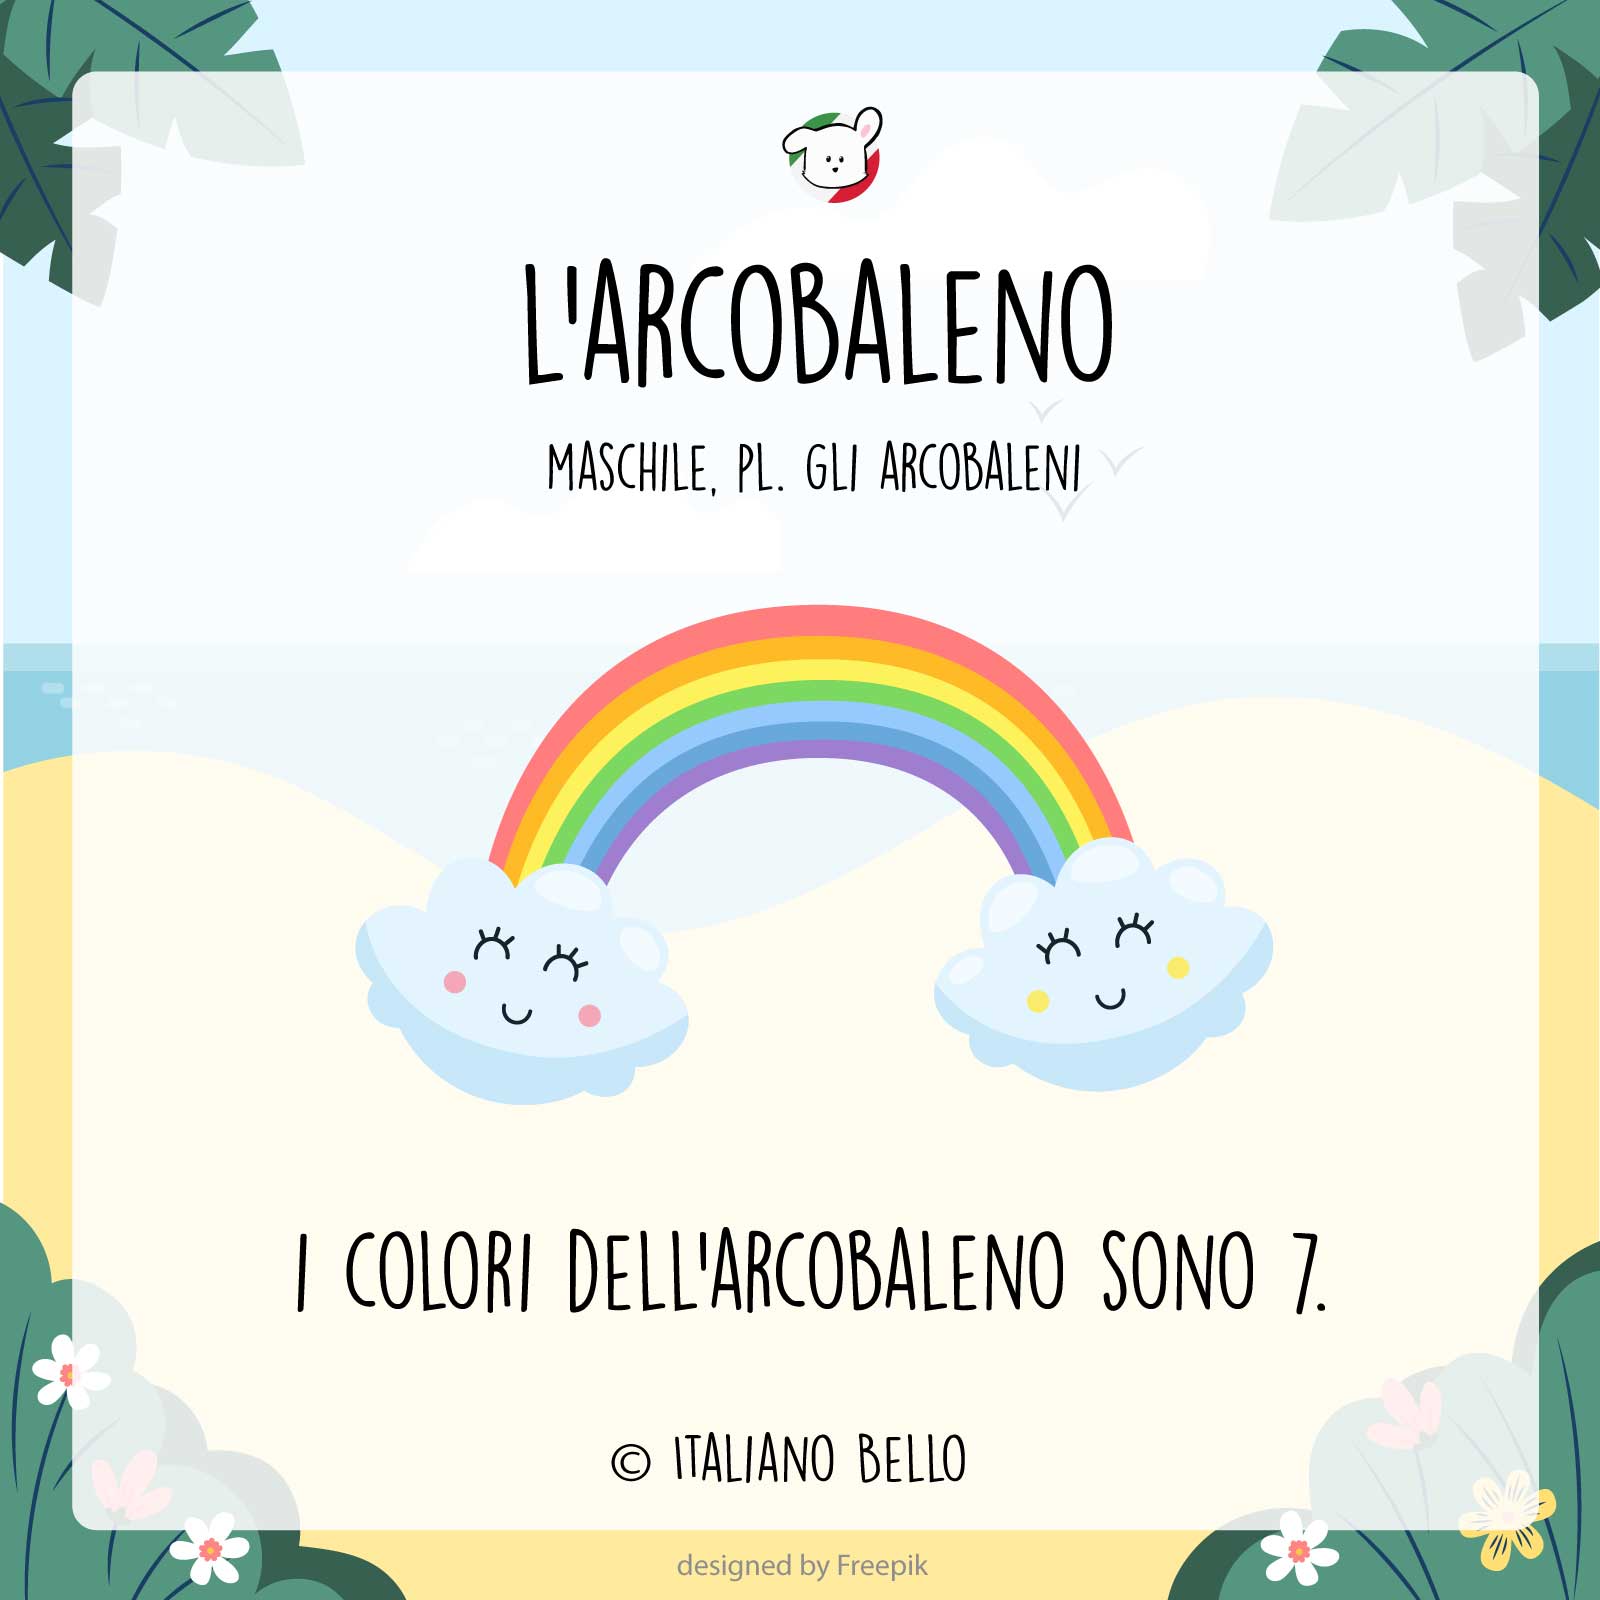 arcobaleno | Italian Picture Dictionary